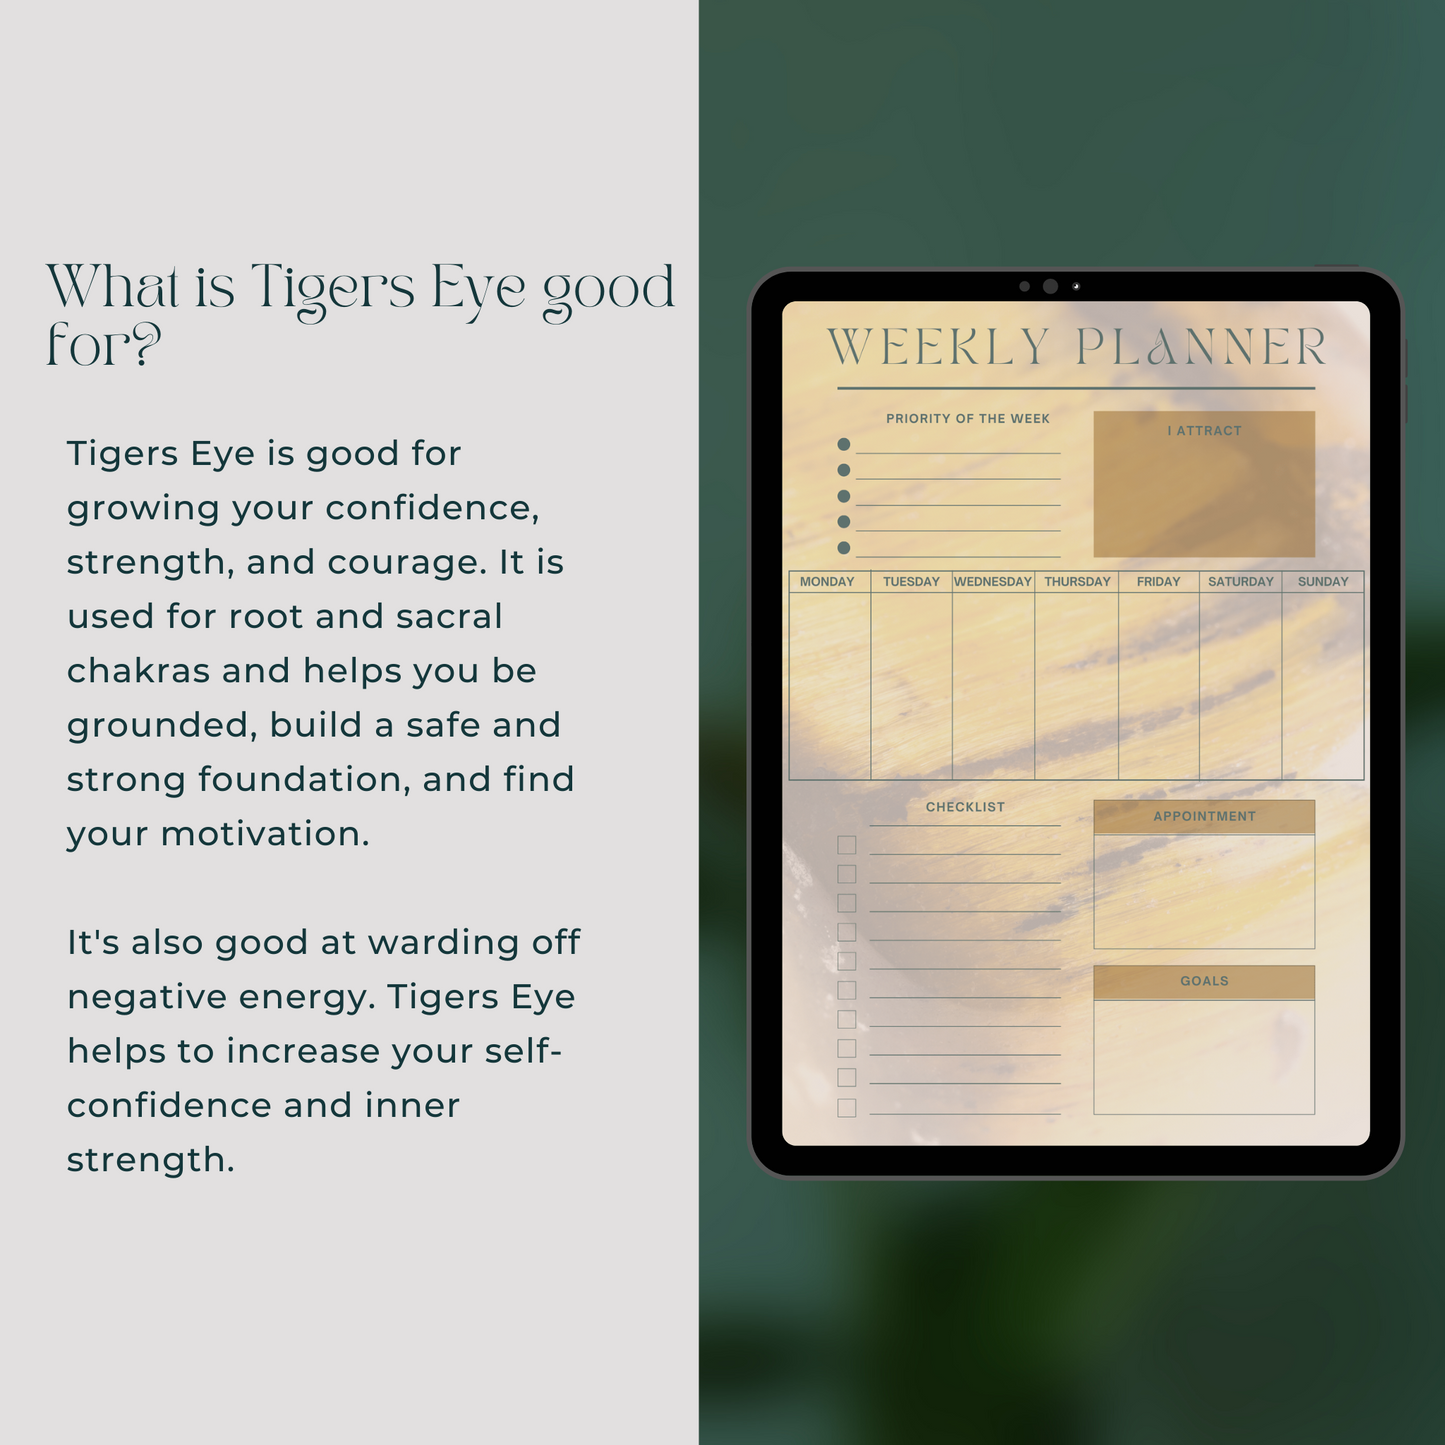 Daily Weekly Monthly Planner Set - Tigers Eye